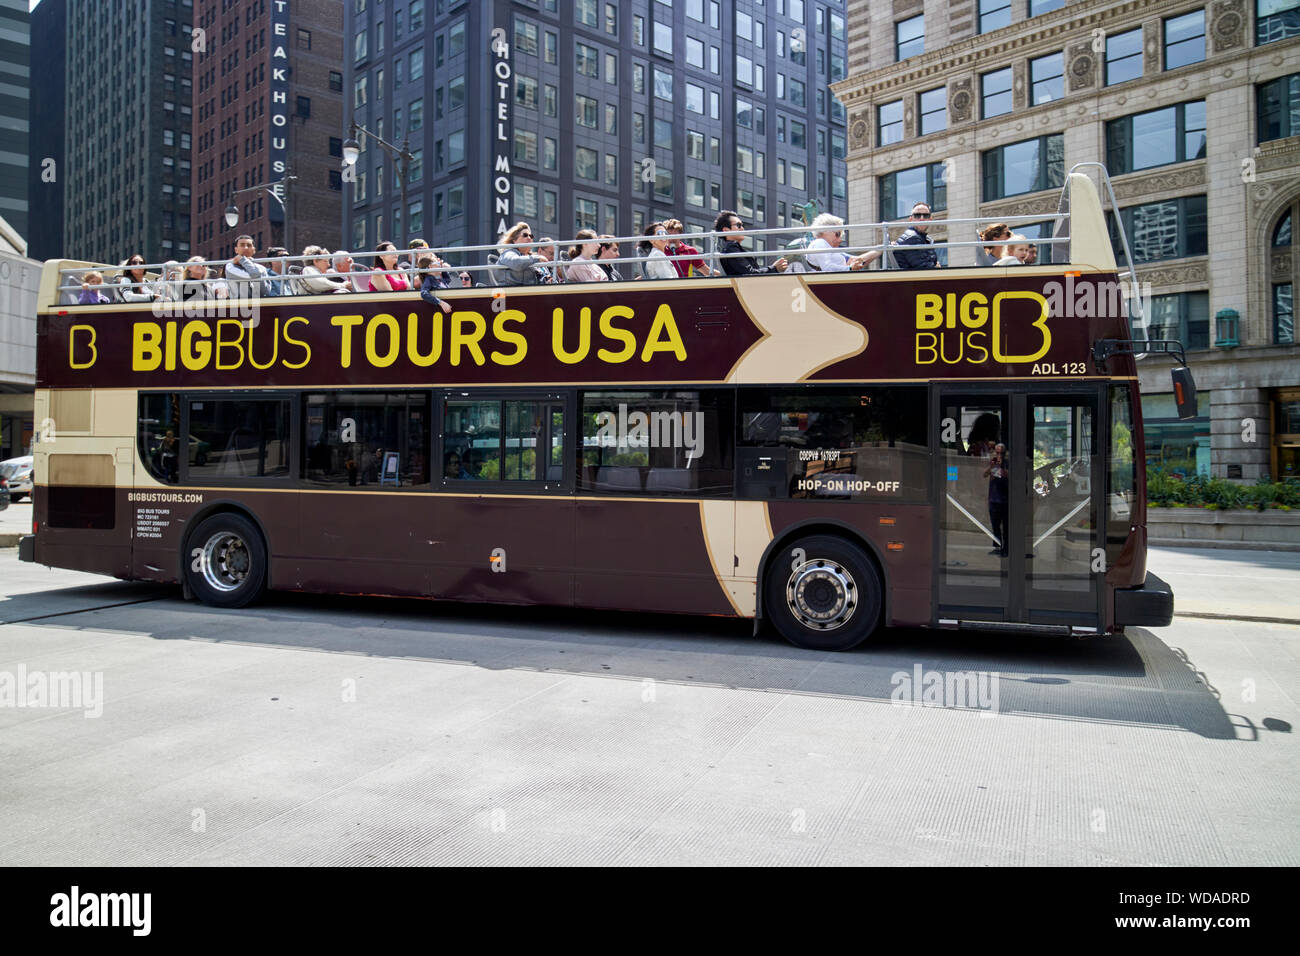 bigbus guided tour of downtown chicago illinois united states of america Stock Photo